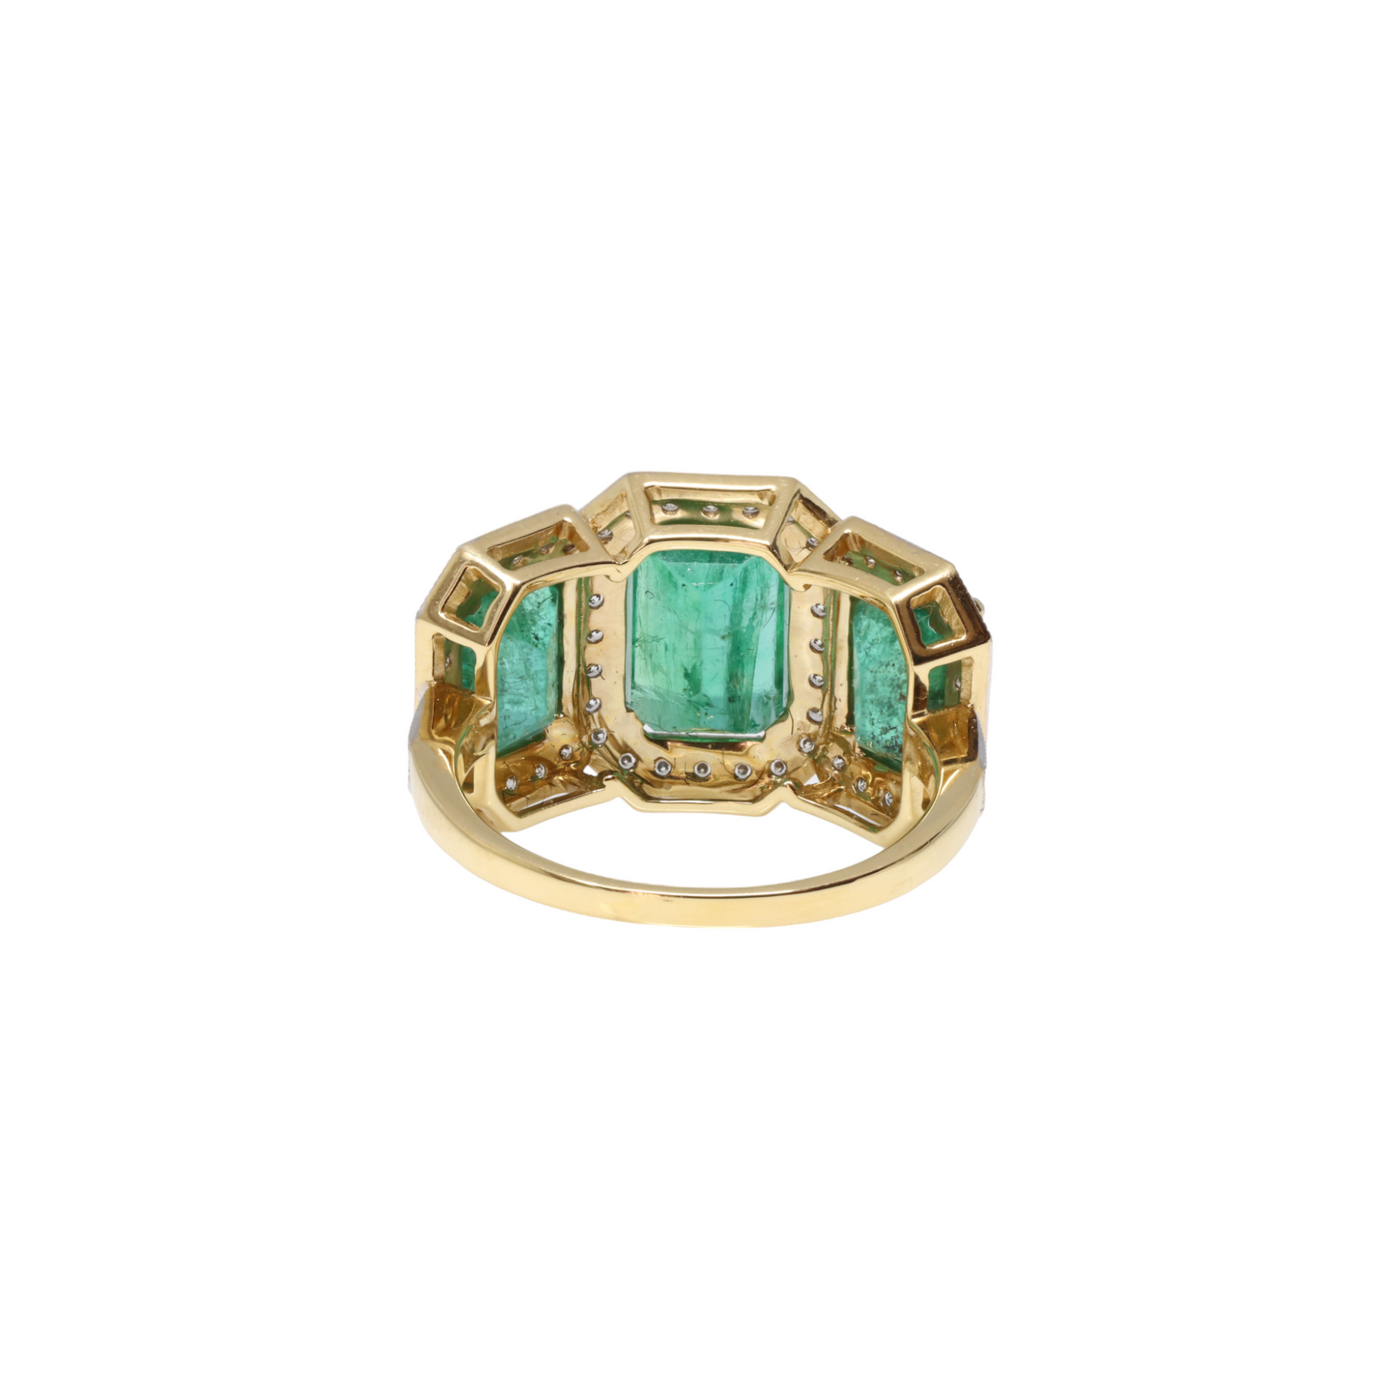 18ct Yellow Gold Trilogy Emerald and Diamond Ring